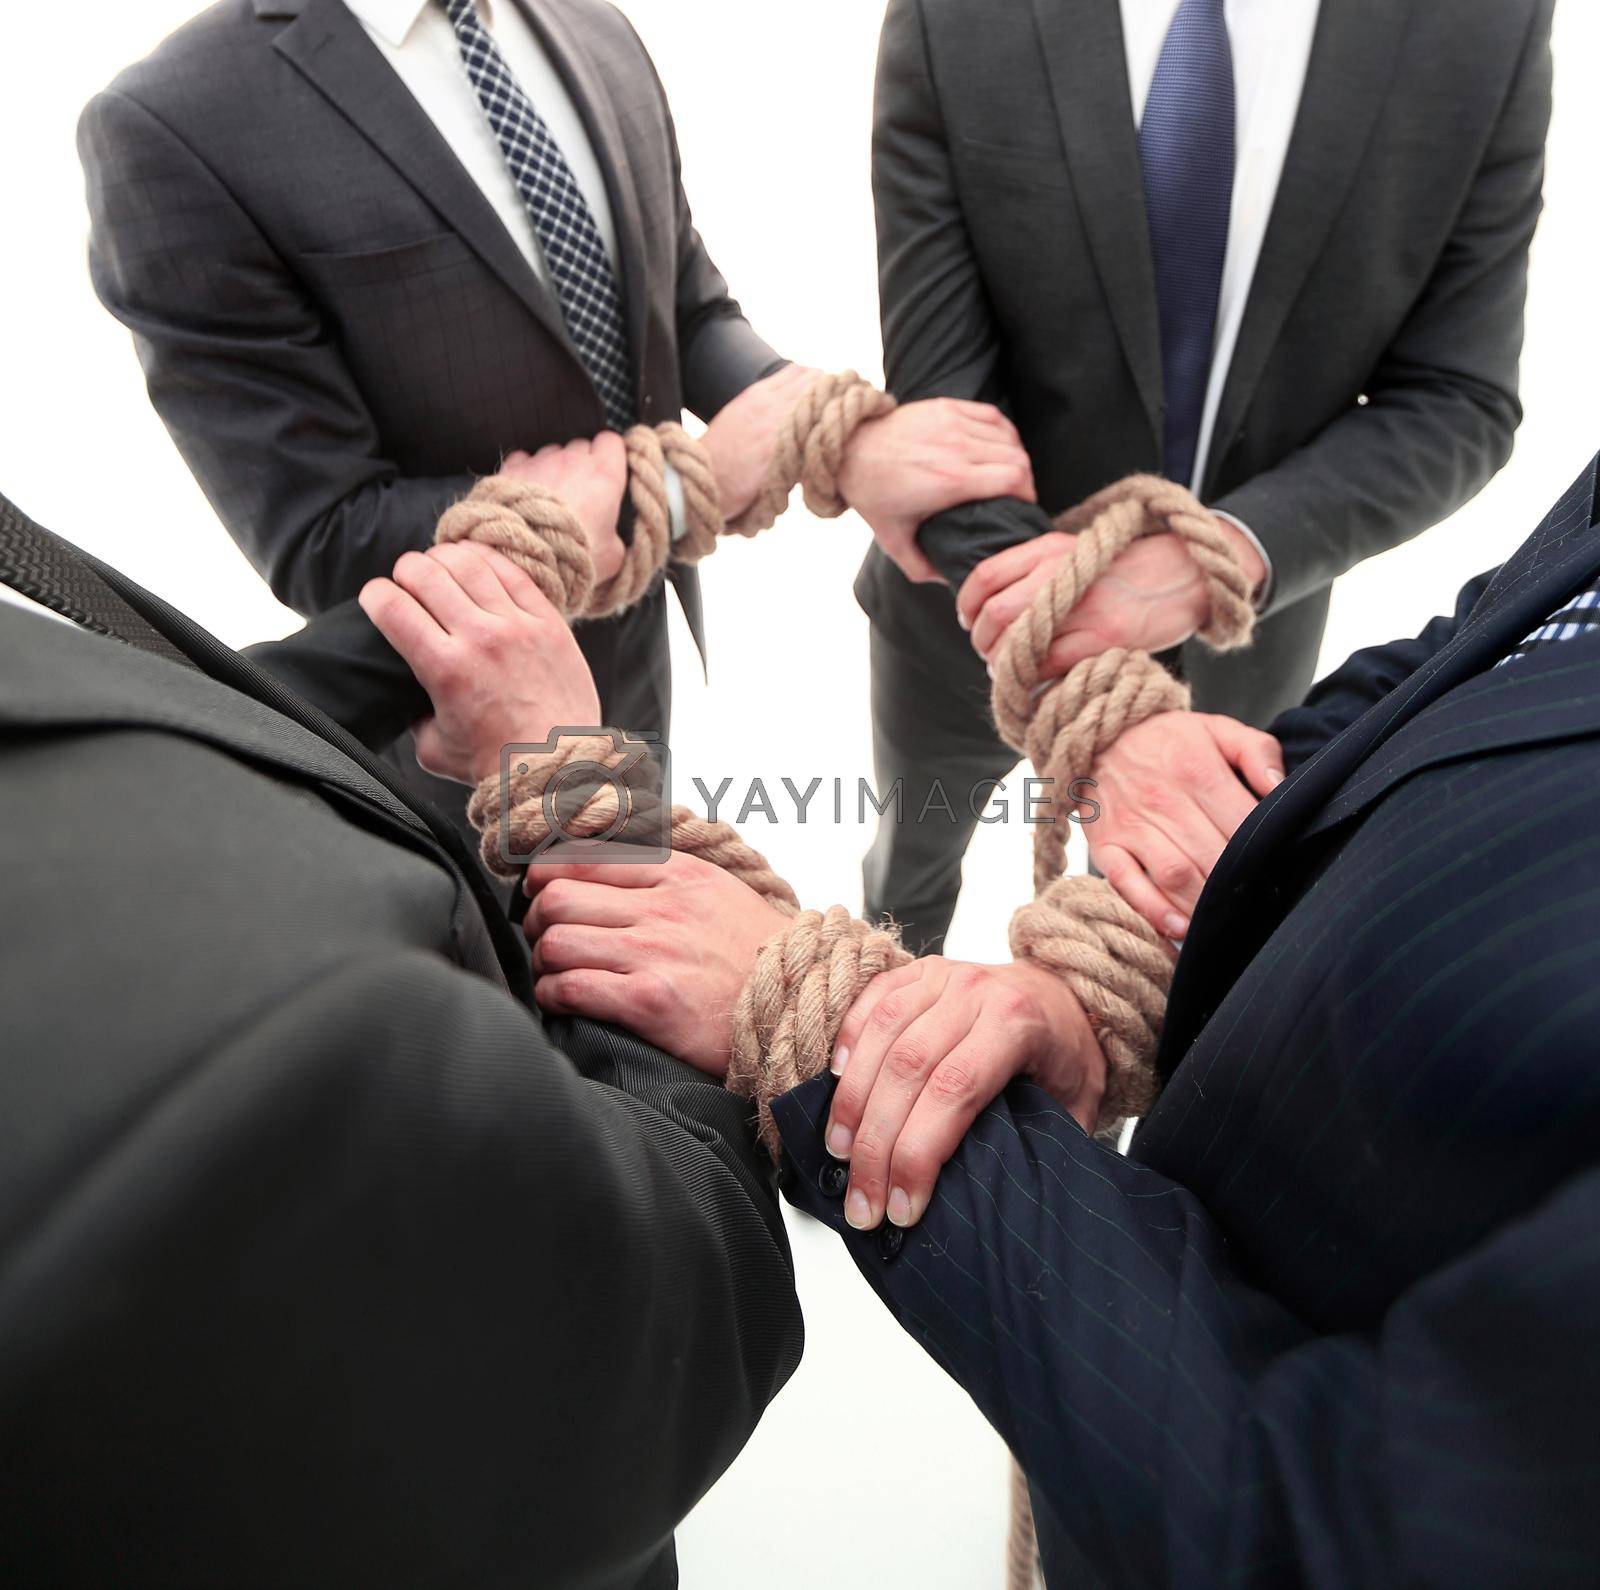 Royalty free image of closeup.group of business people holding hands by asdf